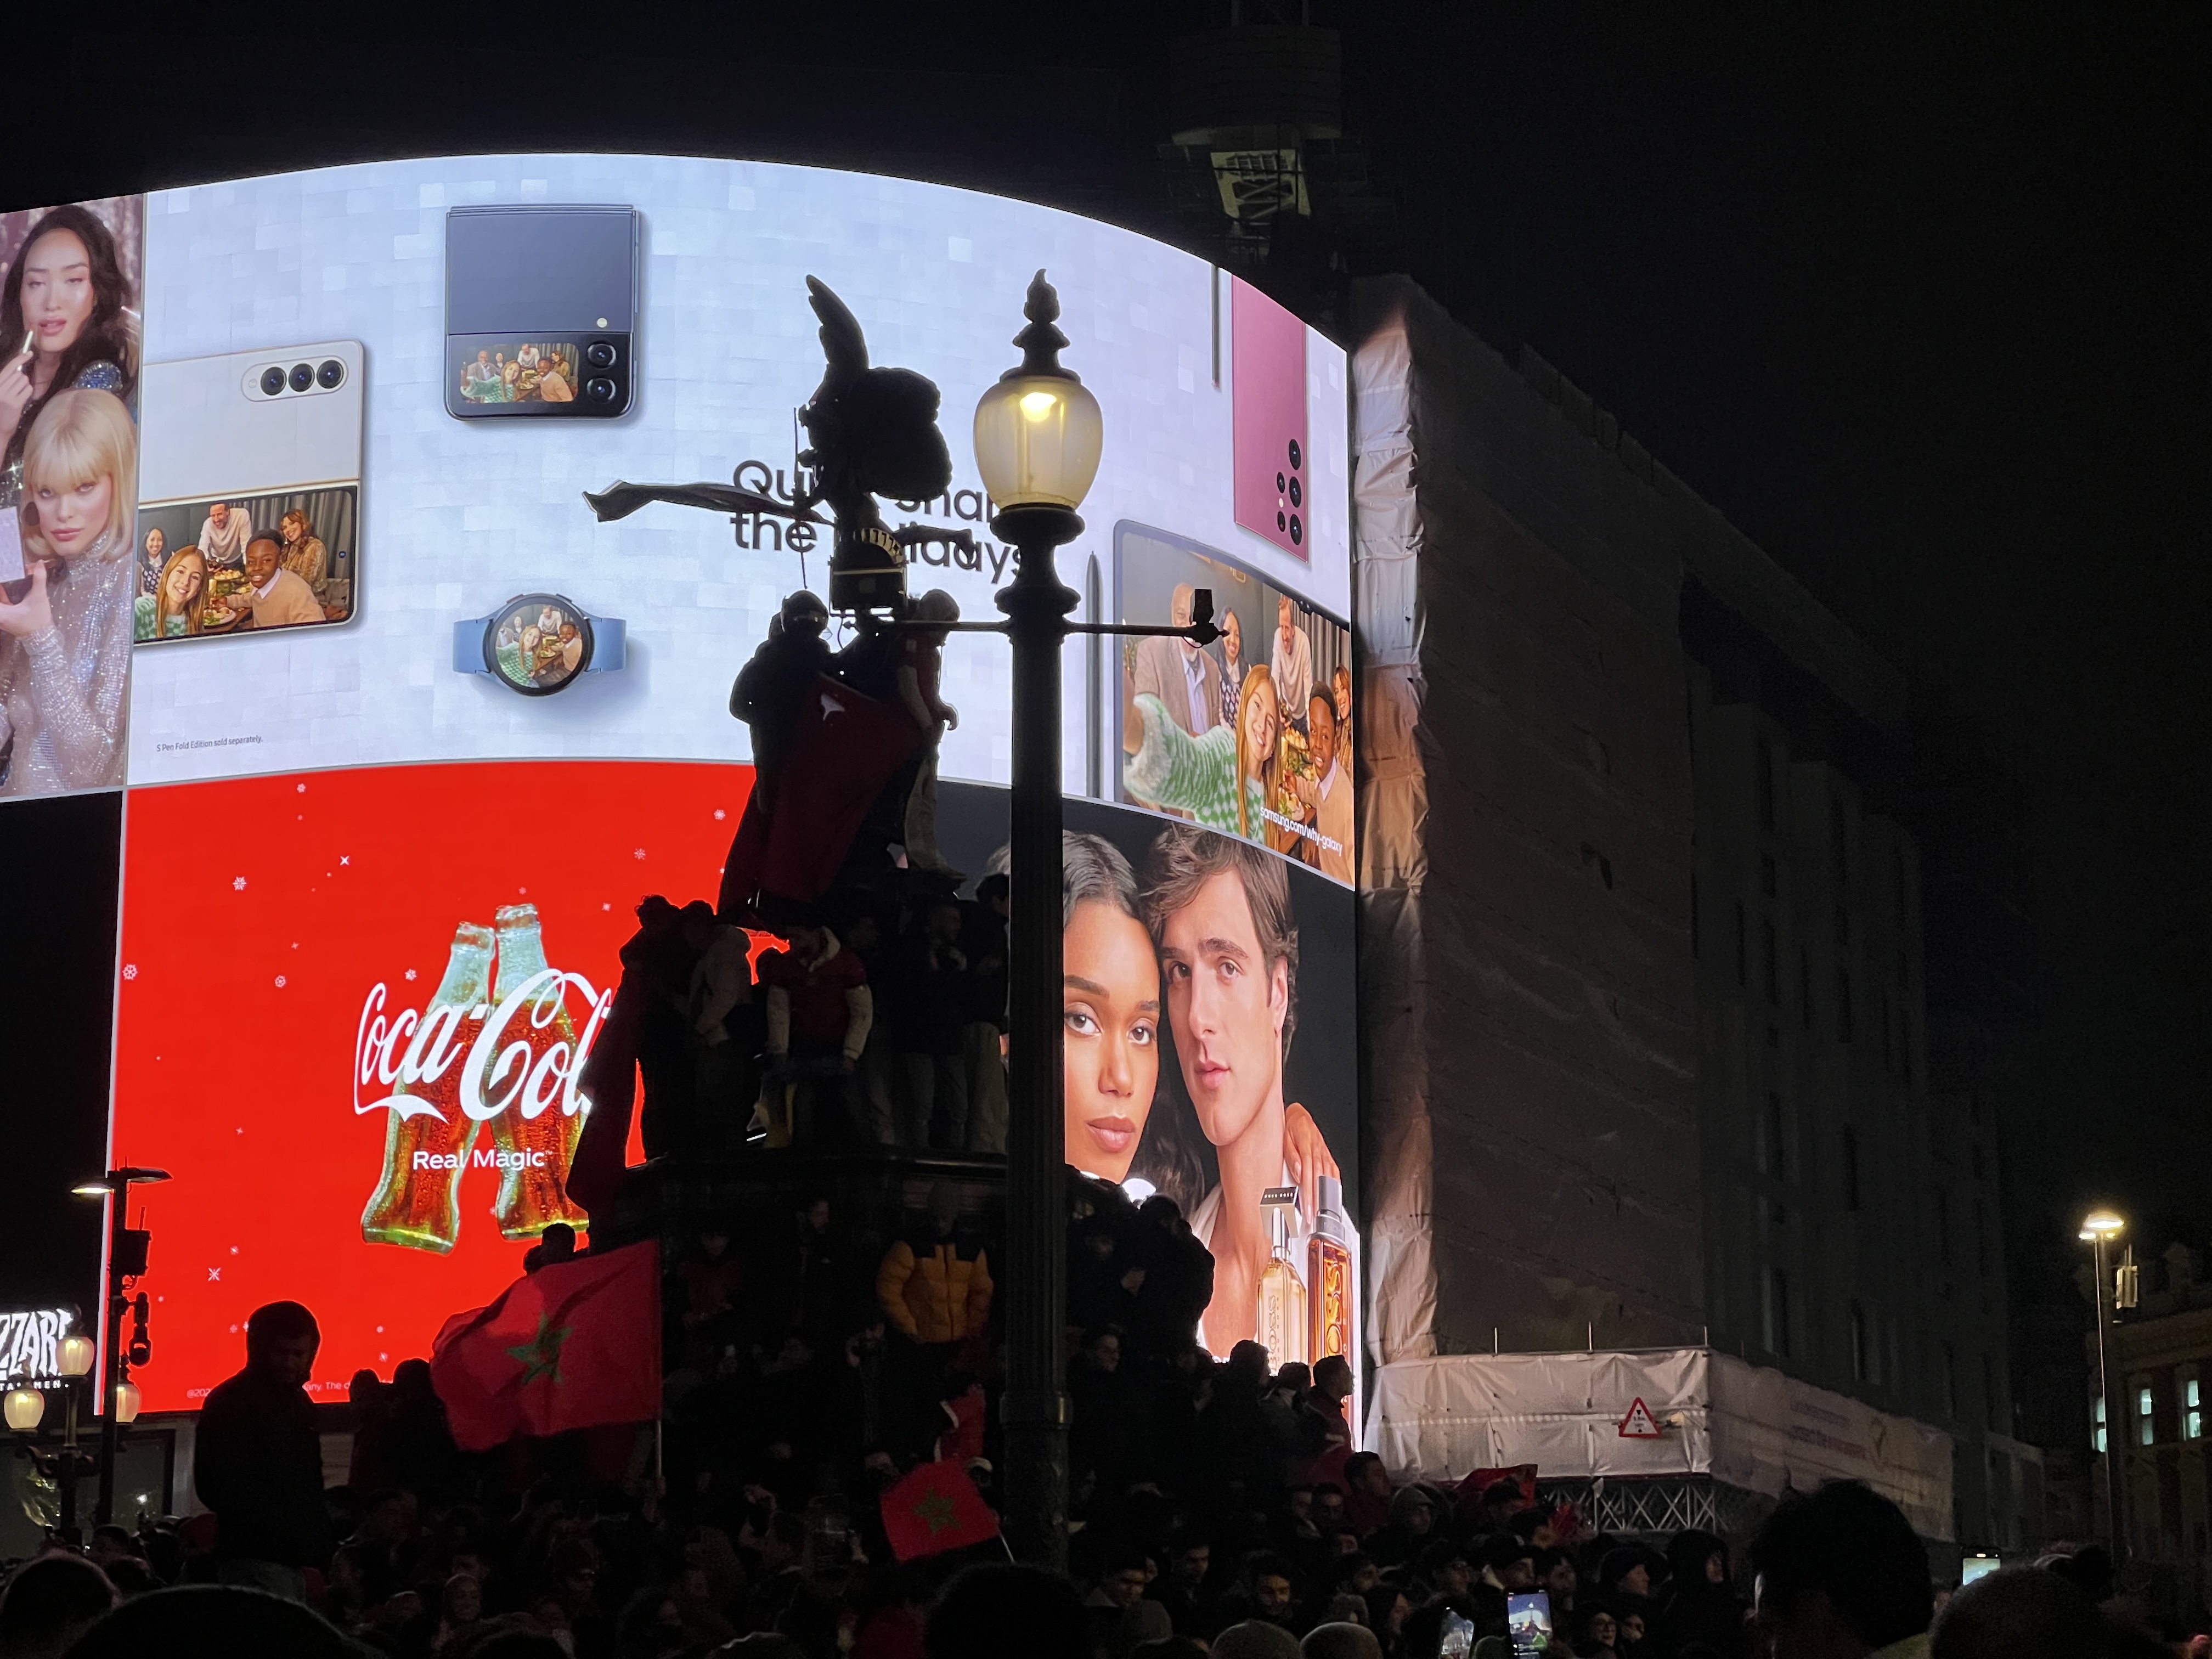 Crowds climbed on top of the Eros statue to place Moroccan flags in London’s Piccadilly Circus (MEE/Areeb ULLAH)